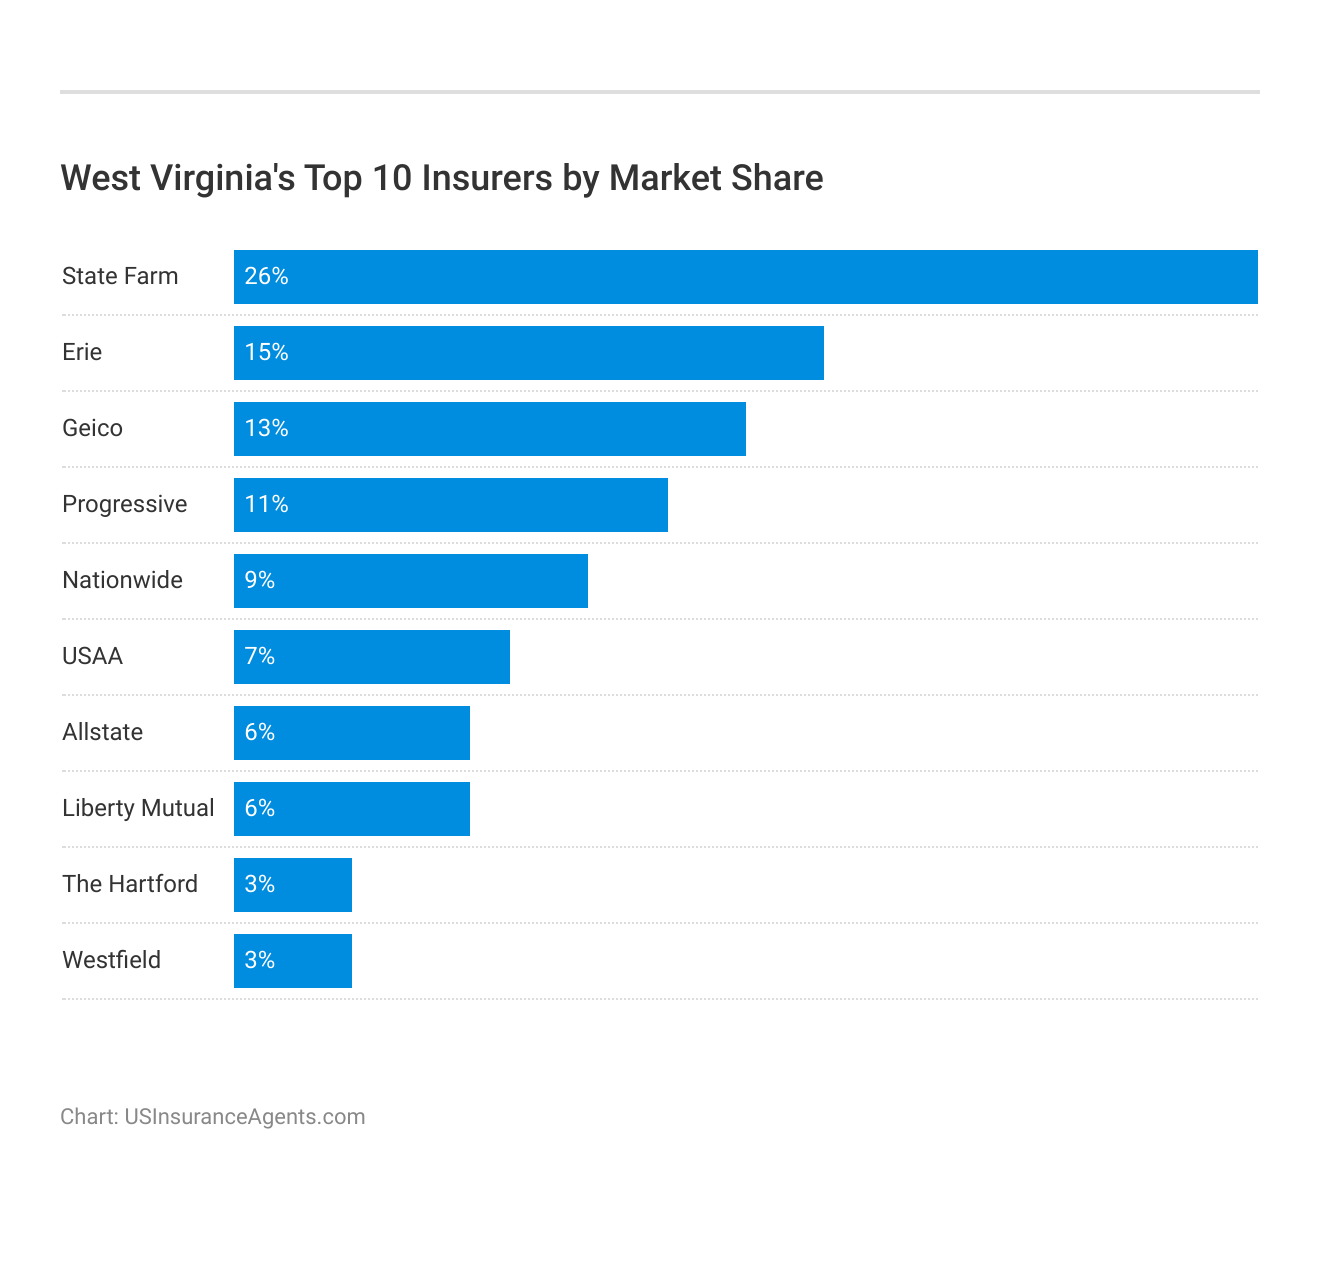 <h3>West Virginia's Top 10 Insurers by Market Share</h3>